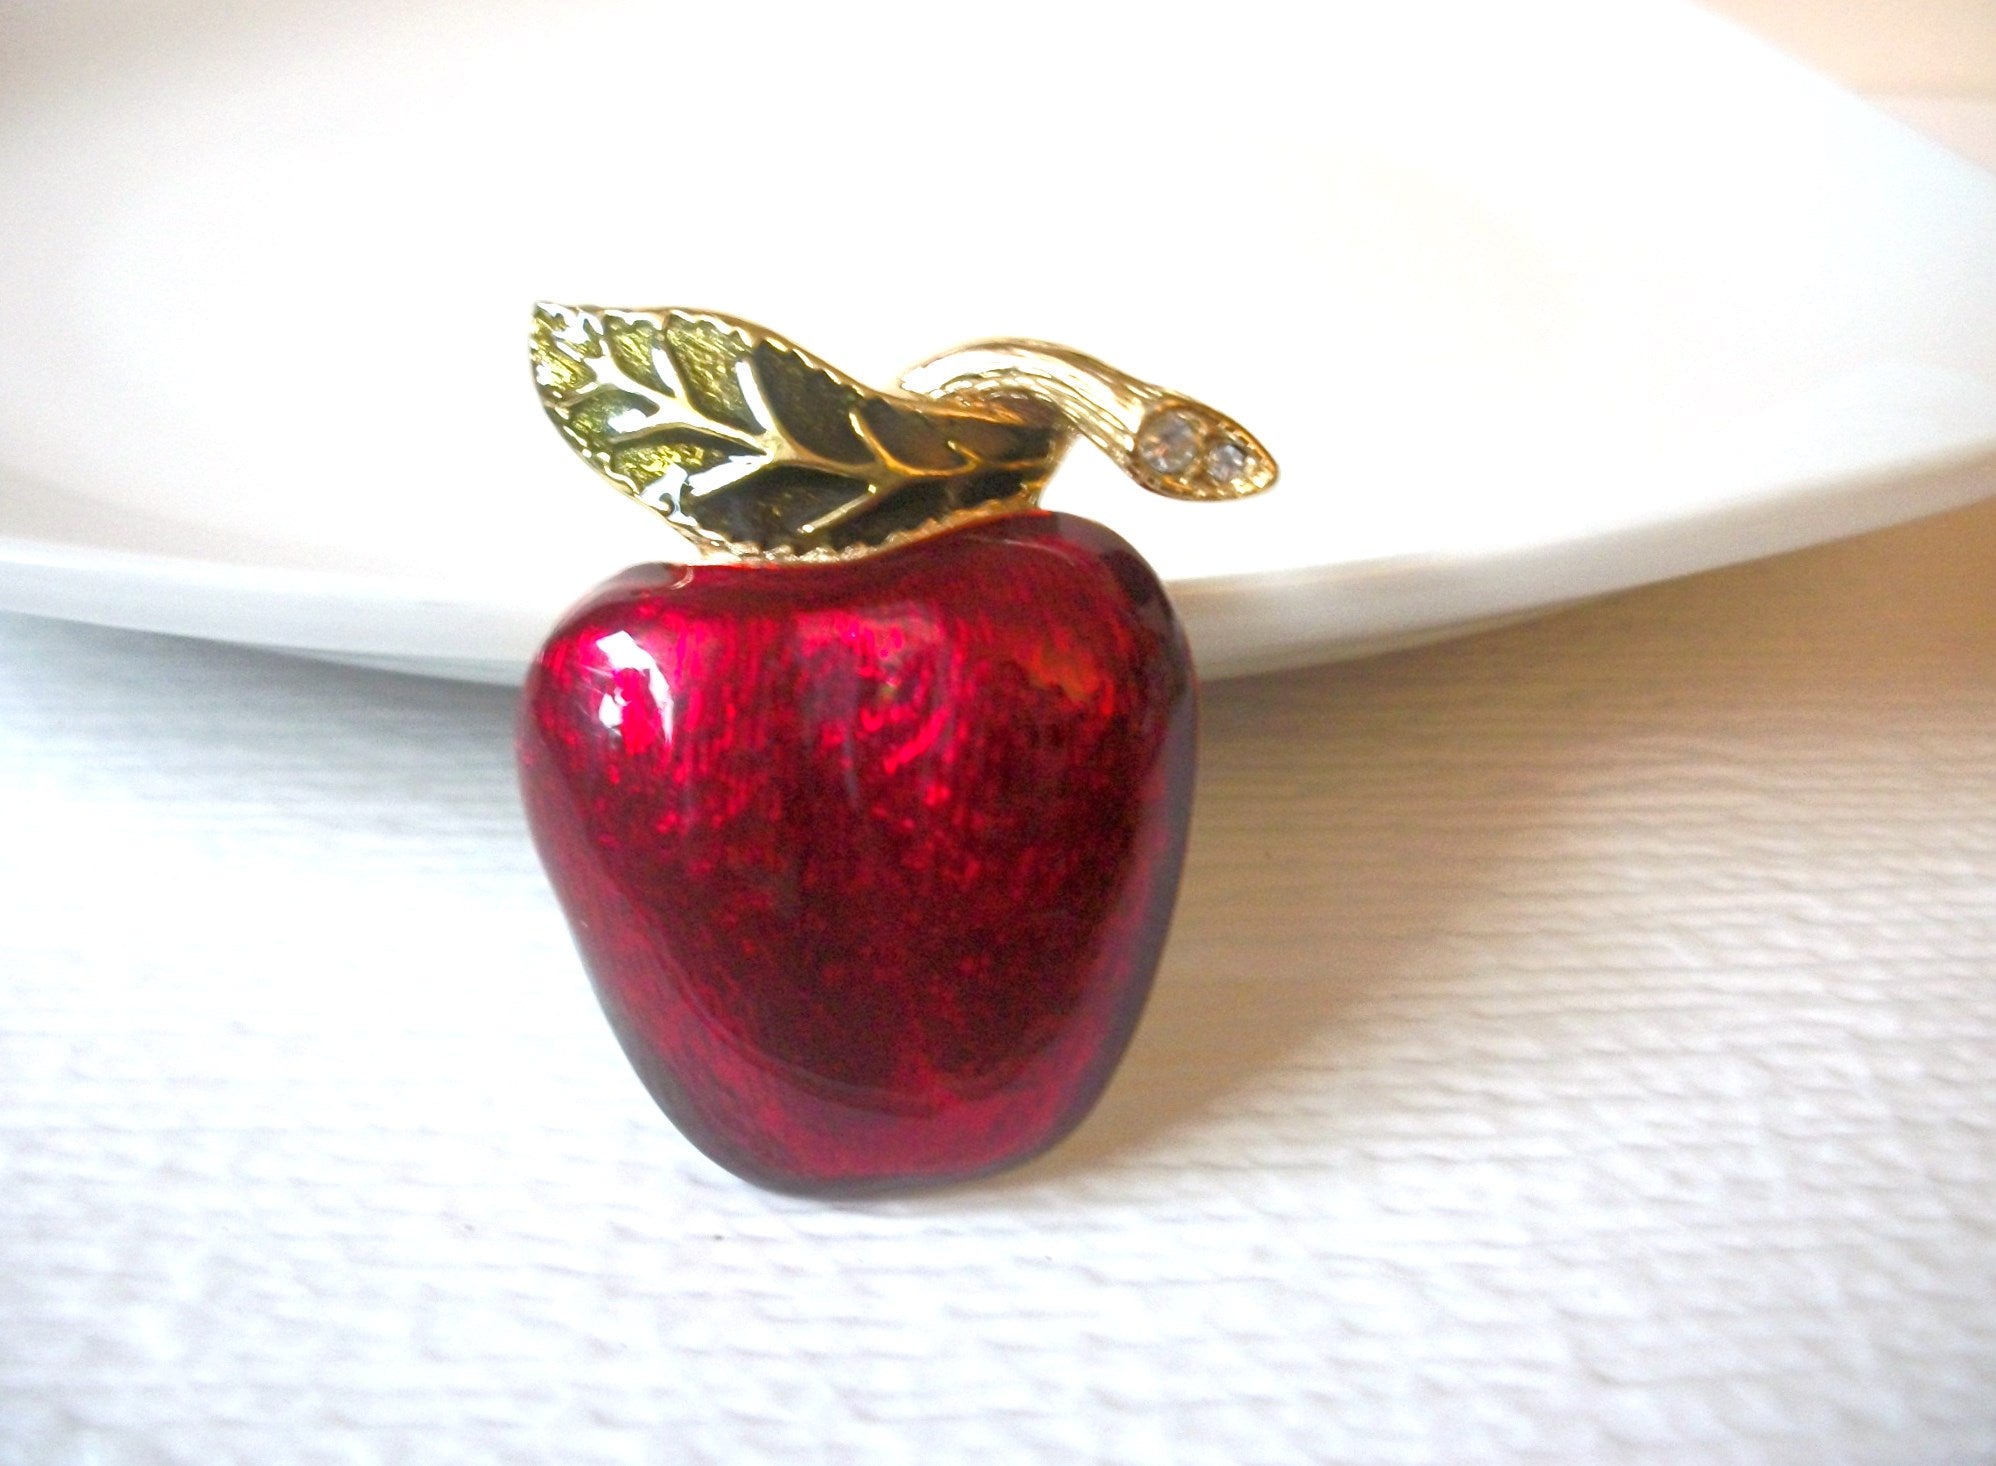 Vintage Brooch Pin Gold Toned Enameled Red Apple 010721